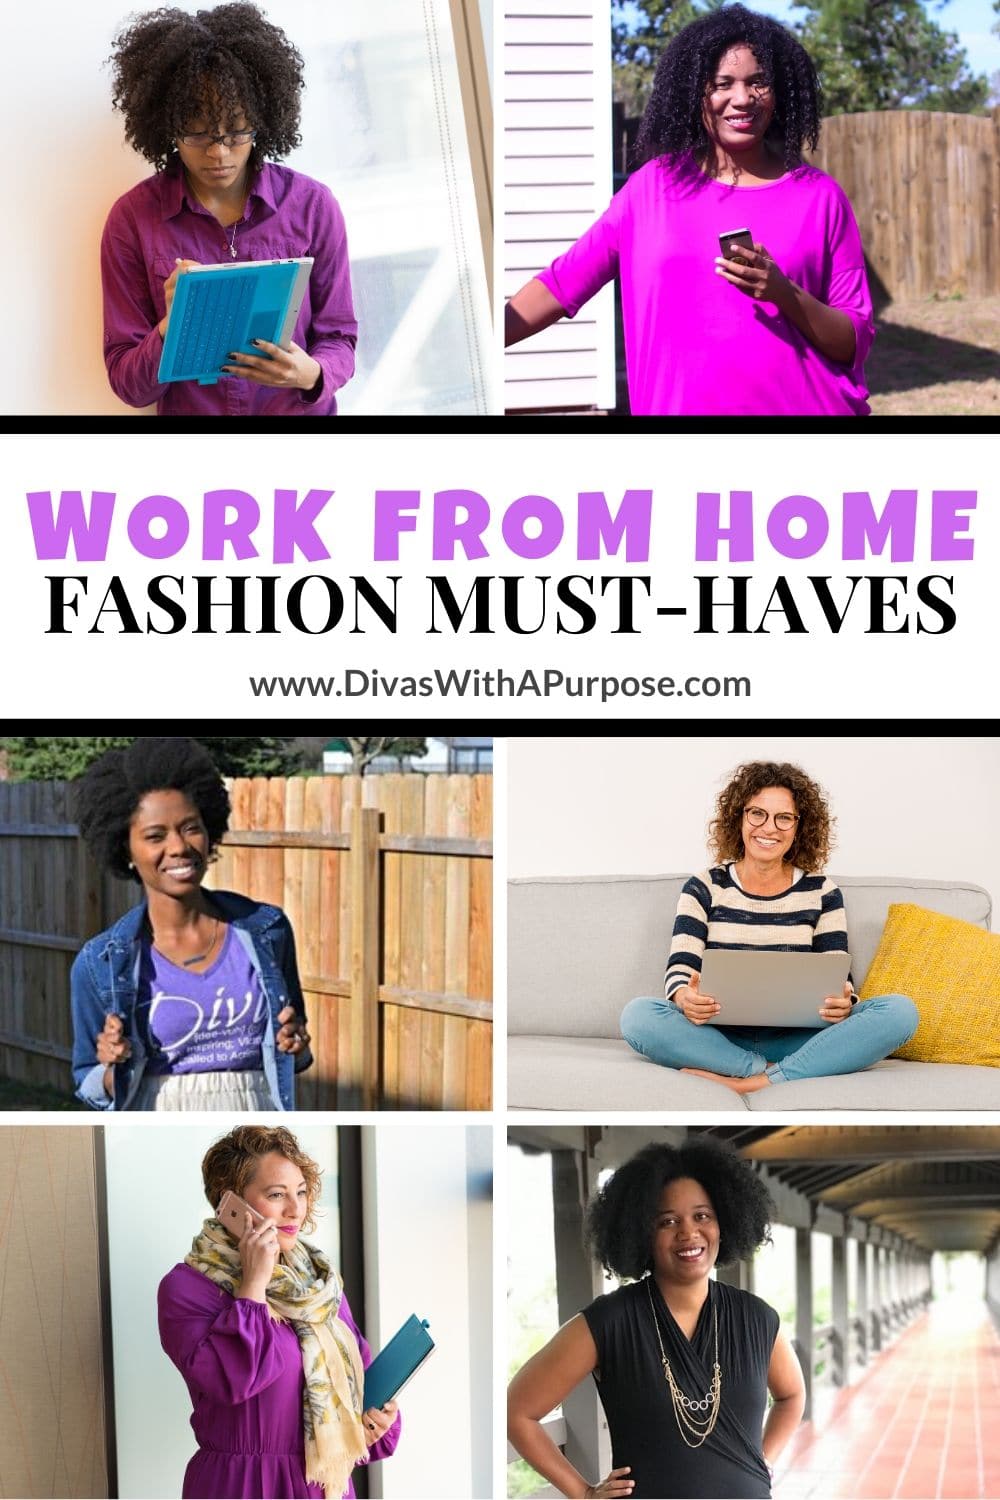 https://www.divaswithapurpose.com/wp-content/uploads/2017/10/When-it-comes-to-work-from-home-fashion-find-what-makes-you-feel-comfortable-and-confident.jpg